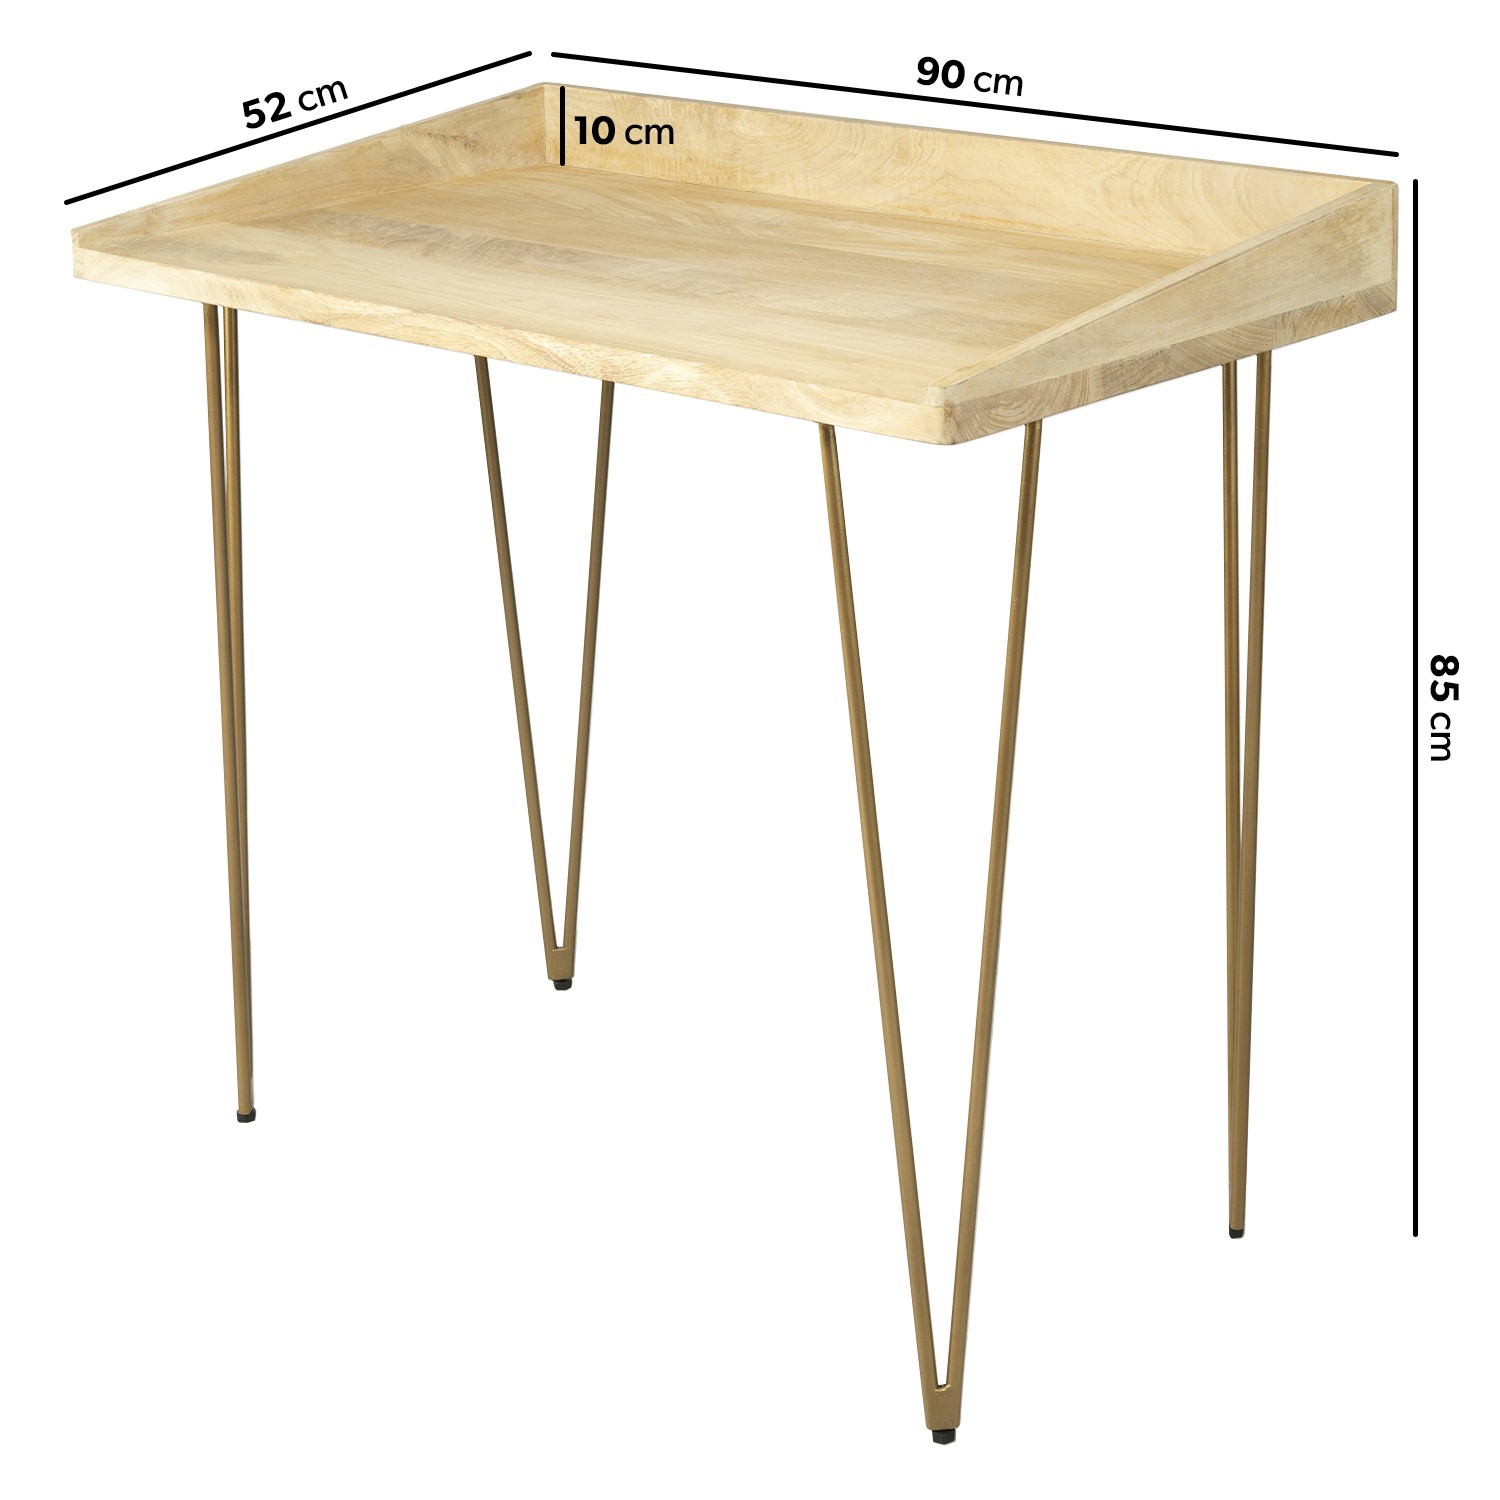 Read more about Small solid wood office desk with hairpin legs inari